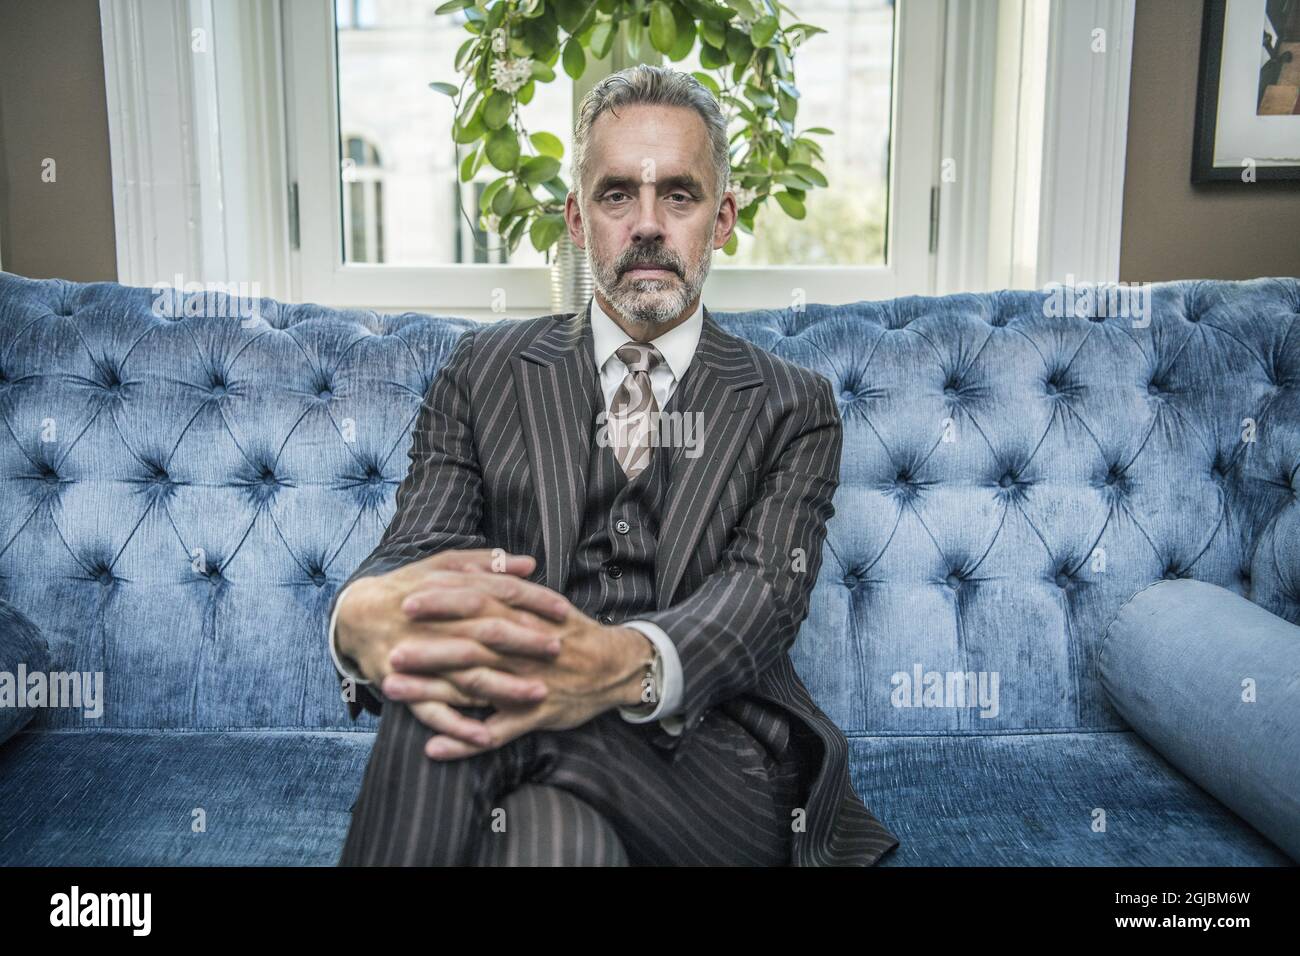 Jordan B Peterson High Resolution Stock Photography and Images - Alamy